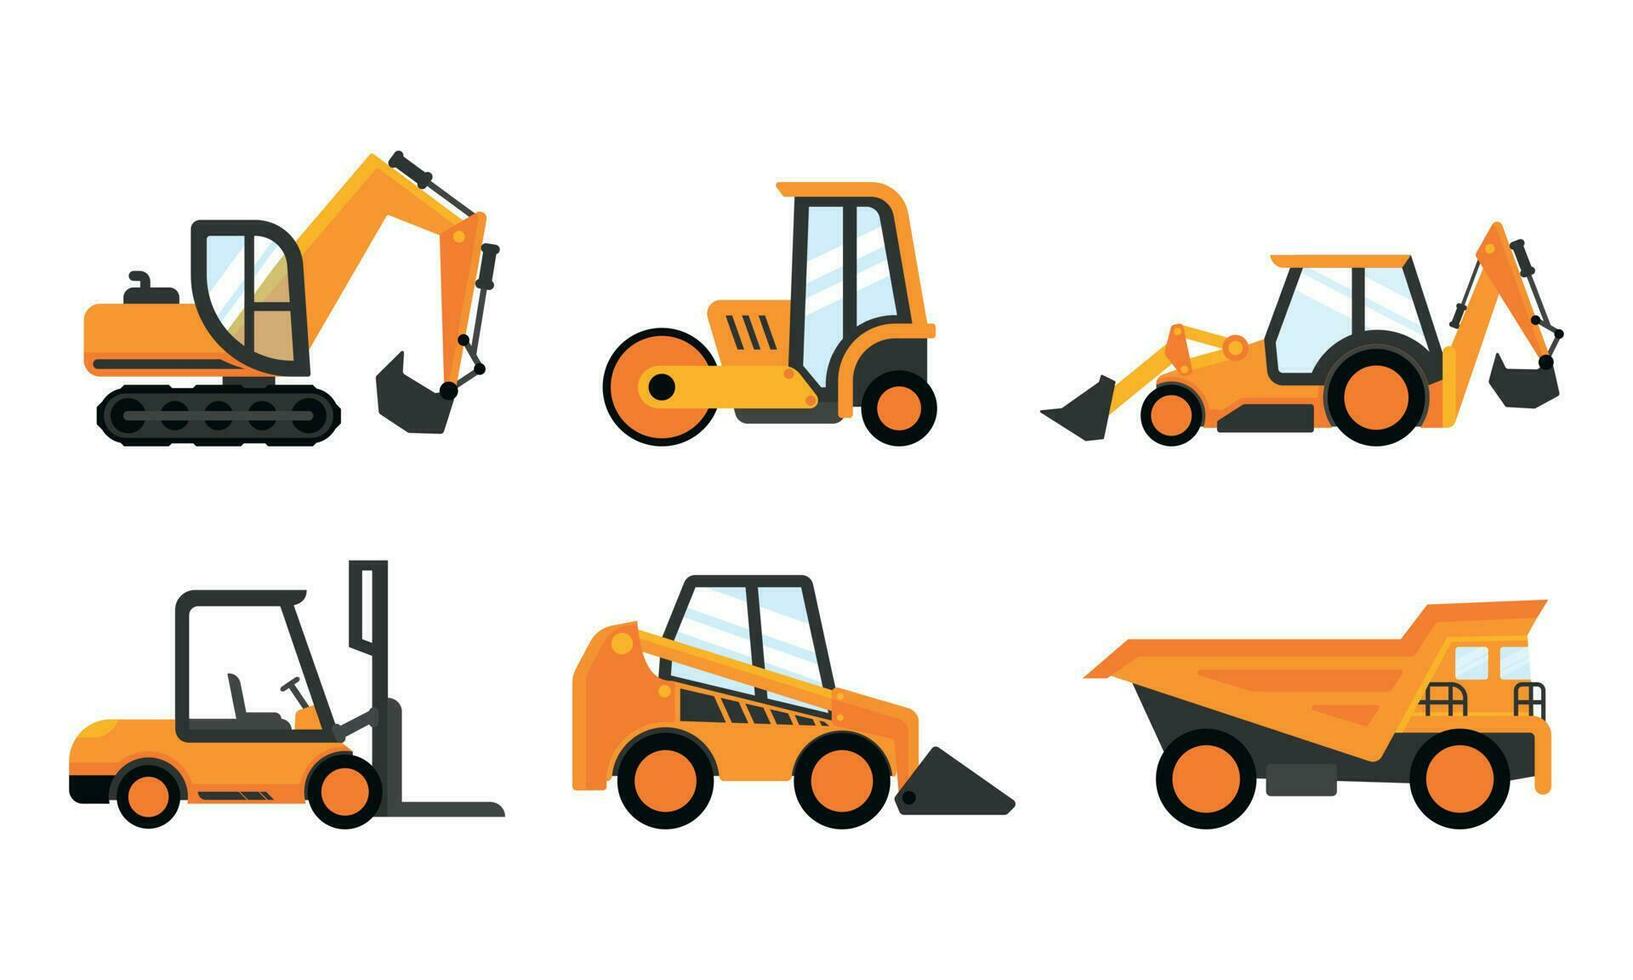 Big set Illustration vector of construction equipment with children style or cartoon style. Special machines for the construction work. Good for children books, educational books, or element design.